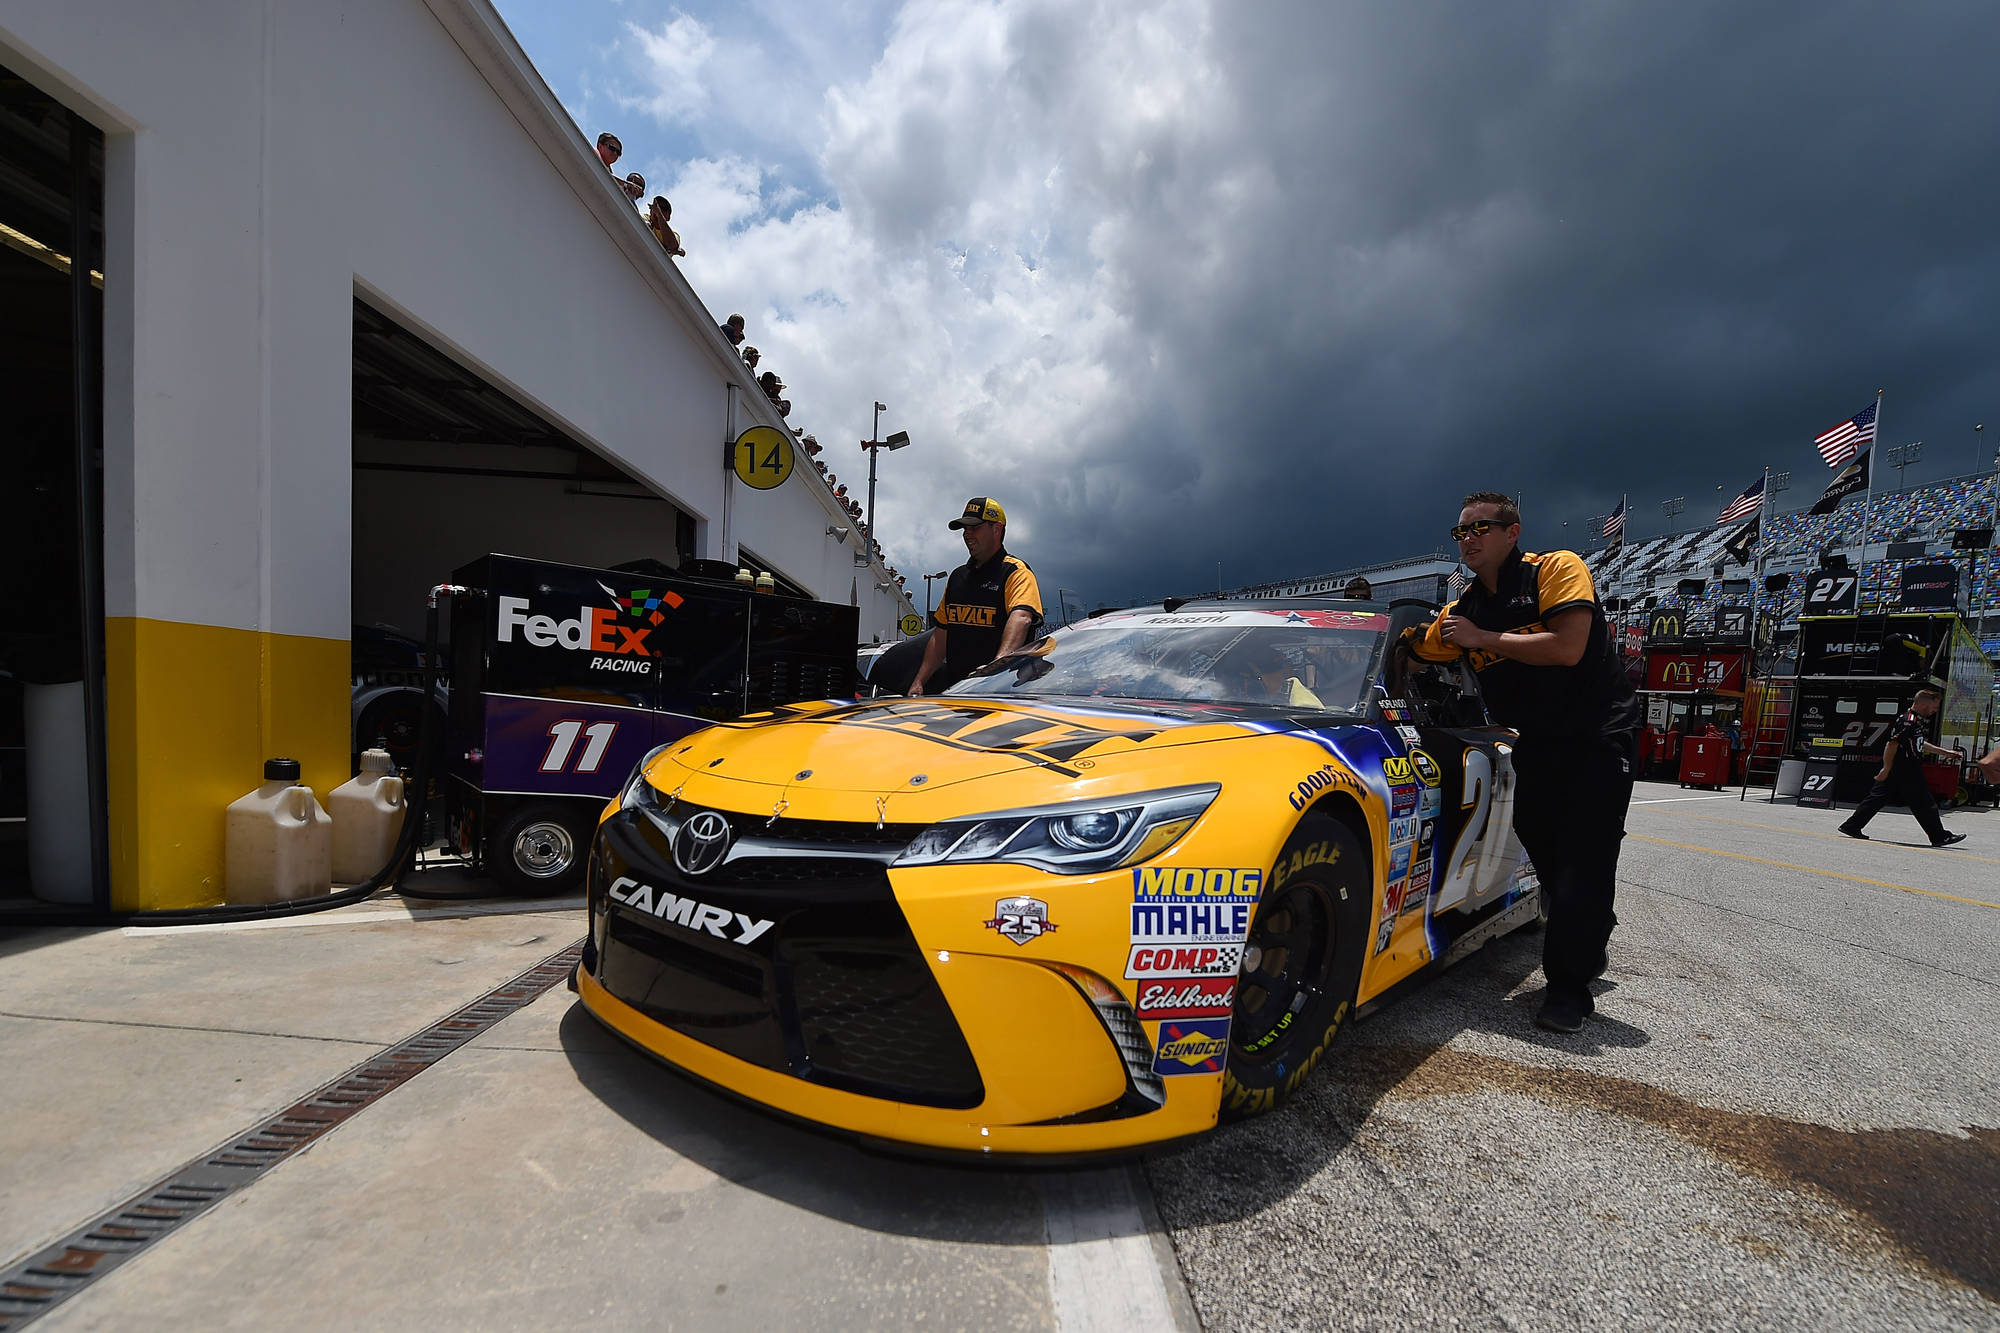 Kenseth Fails Post-Race Laser Inspection, Heads to R&D Center Tuesday